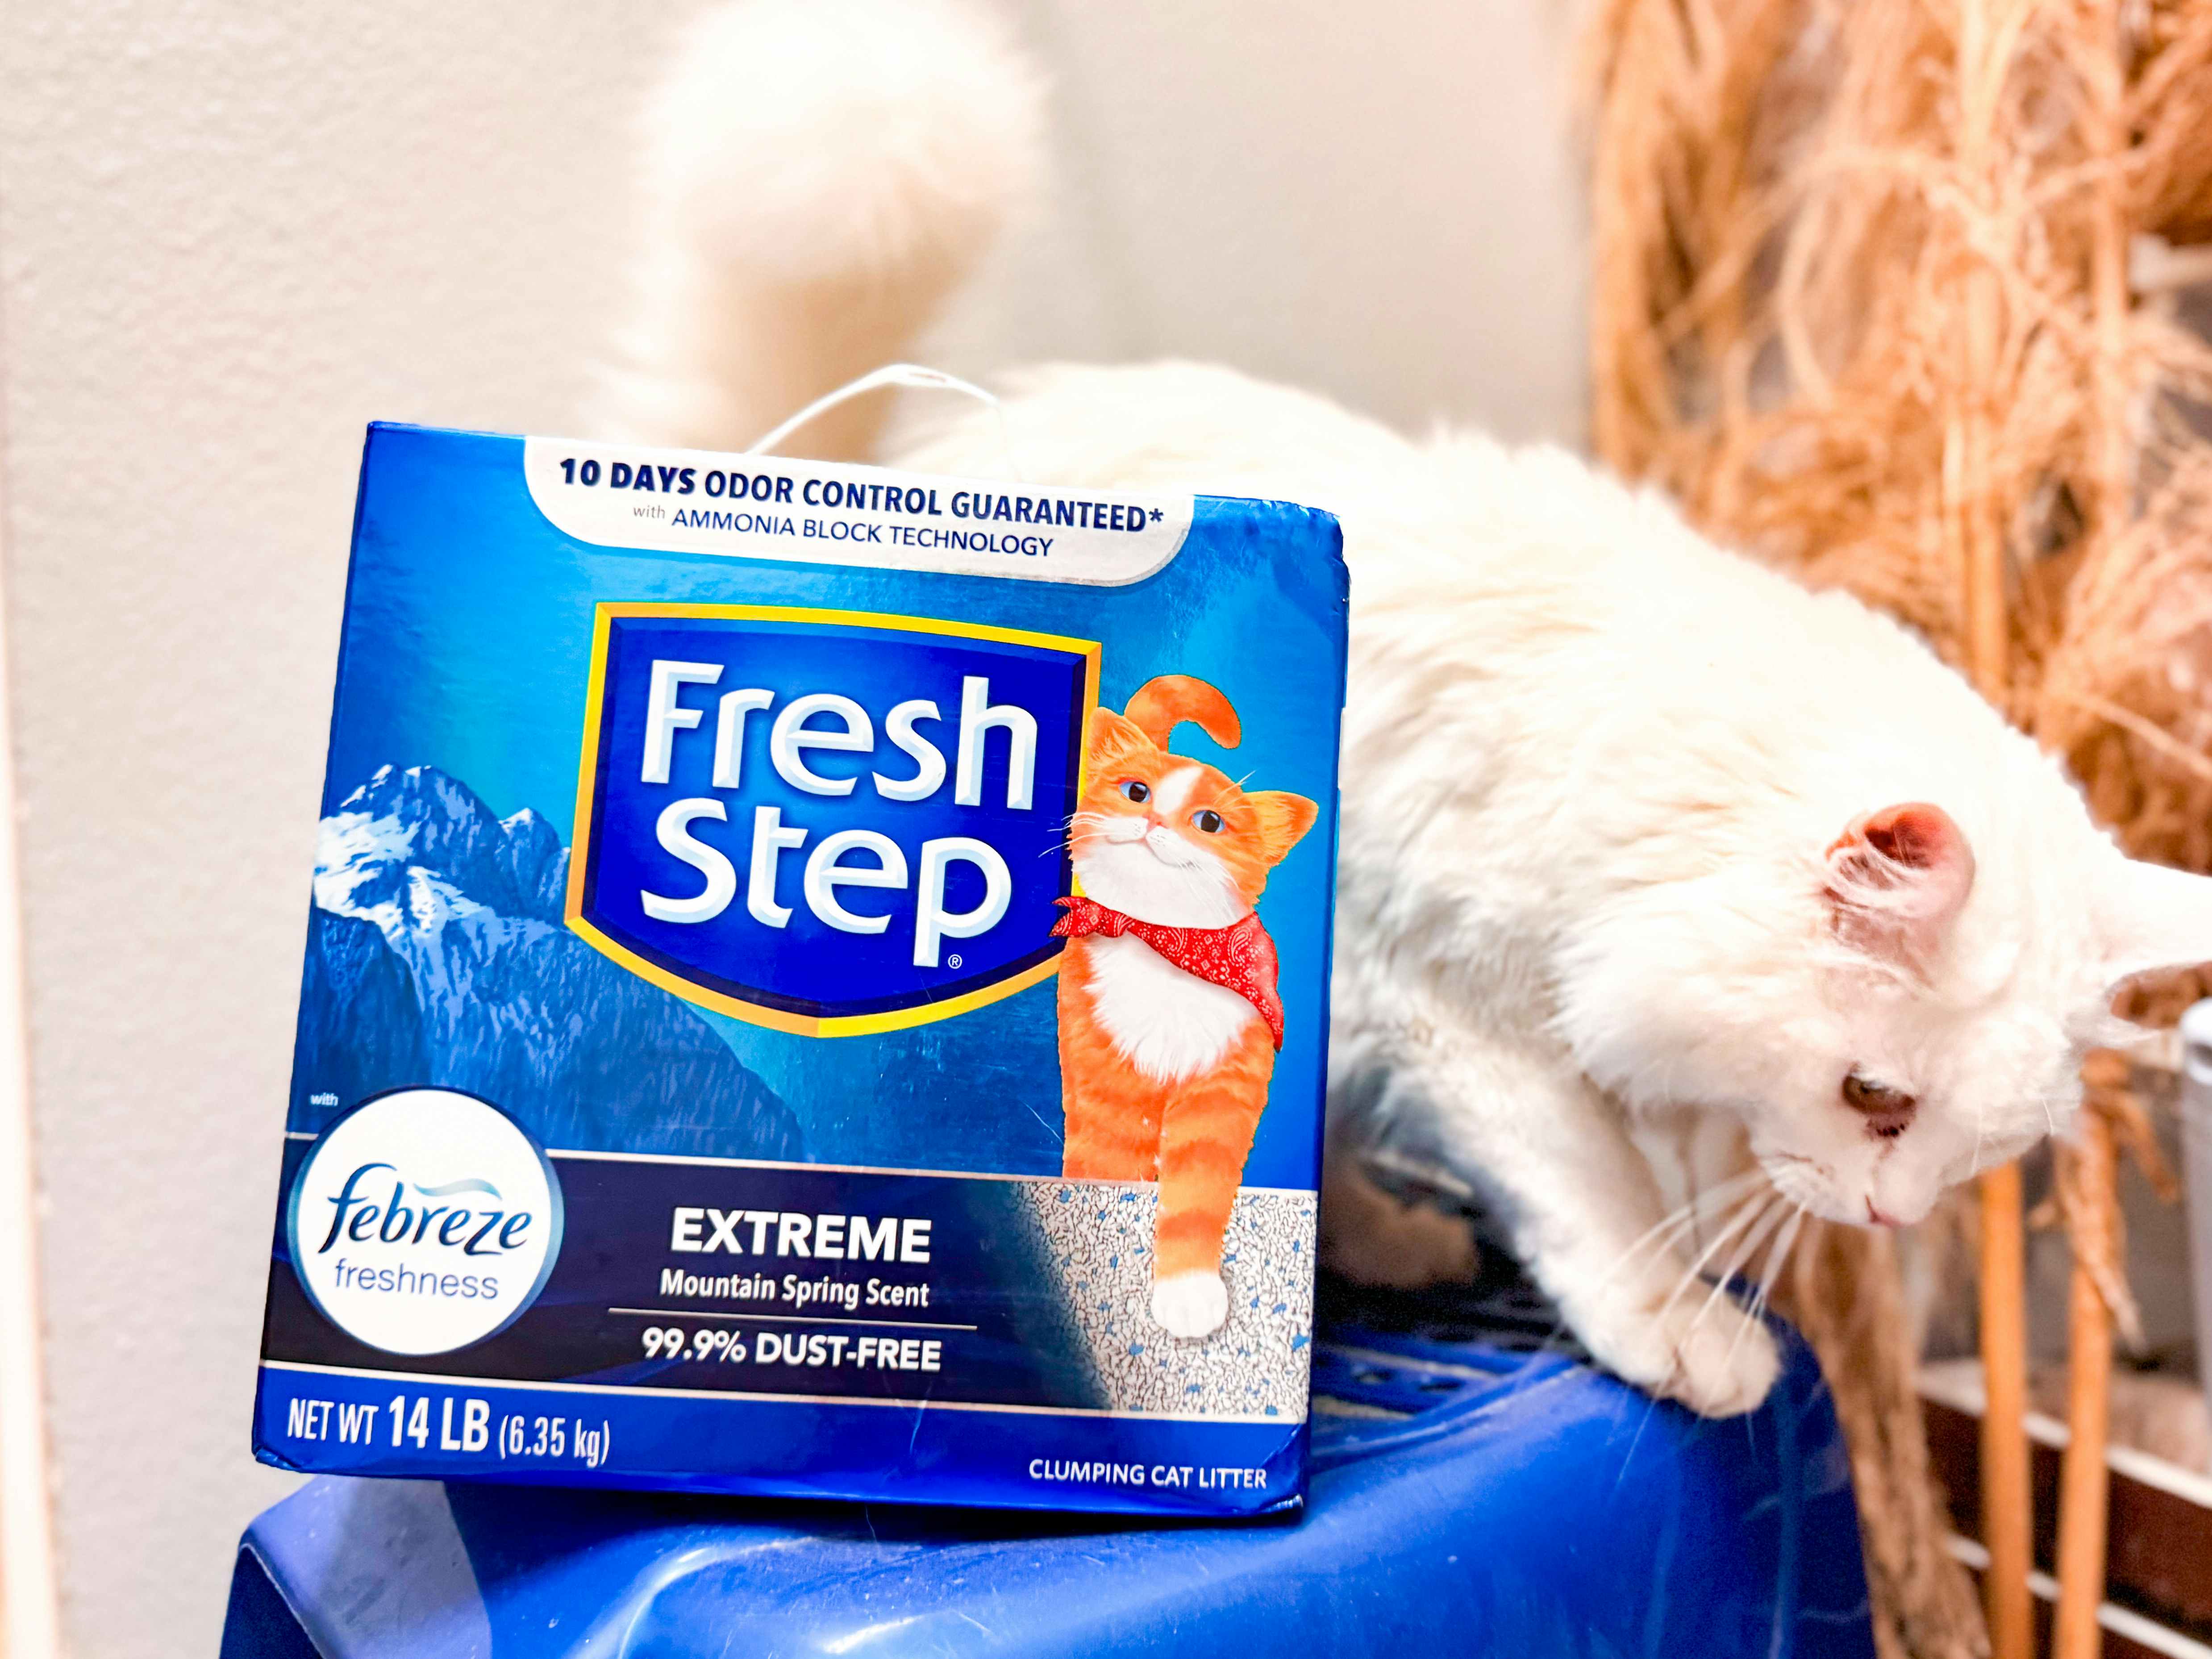 Get a Box of Fresh Step Cat Litter for $5 on Amazon and More Deals